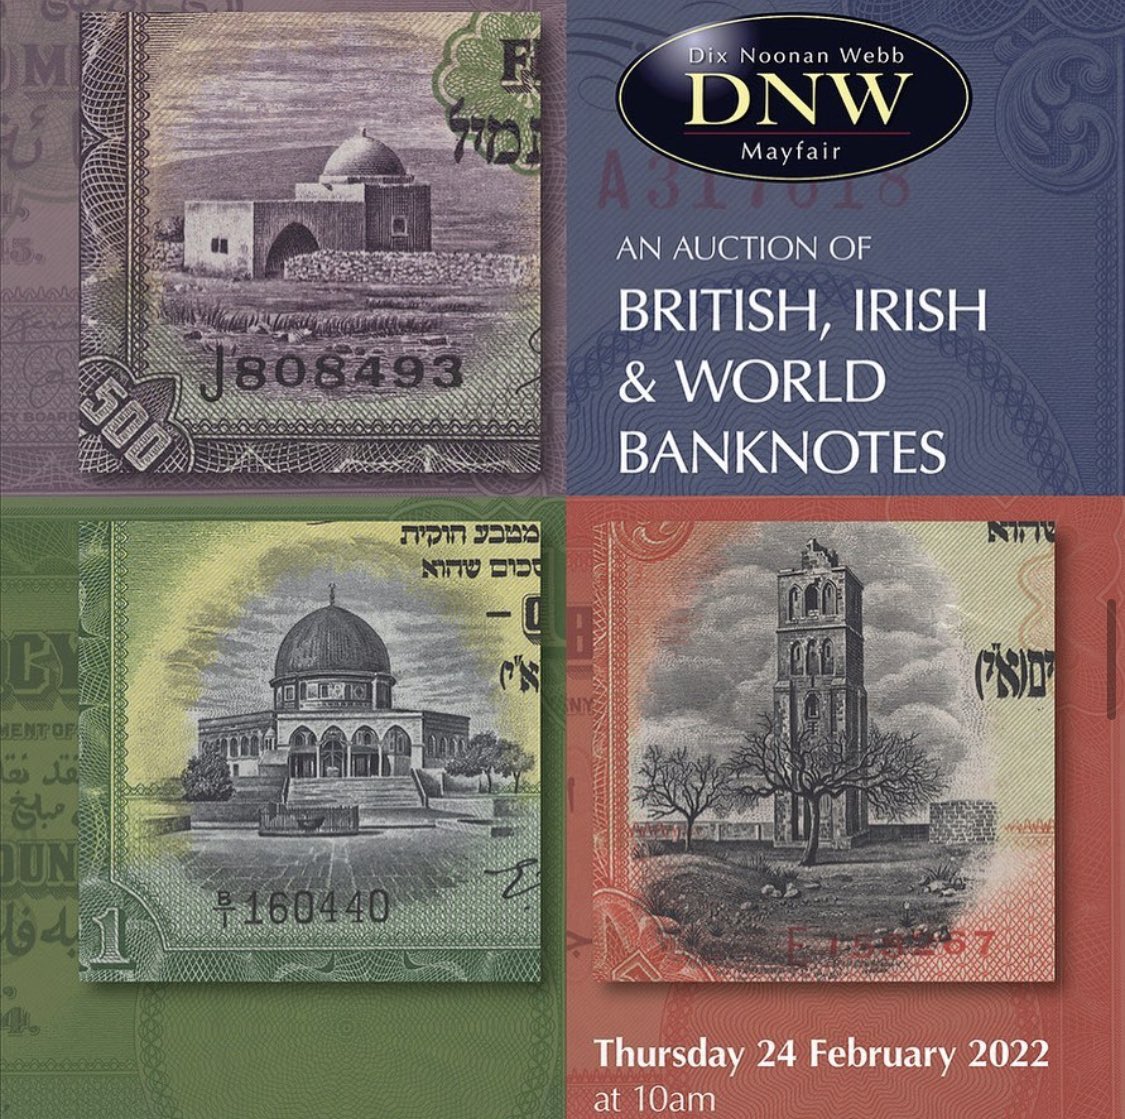 Our British, Irish and World #Banknotes #auction starts TODAY at 10am
#bidlive! #watchlive!
#banknotes #notaphily #auction #mayfair #papermoney #art #design
#britishbanknotes #irishbanknotes #worldbanknotes dnw.co.uk